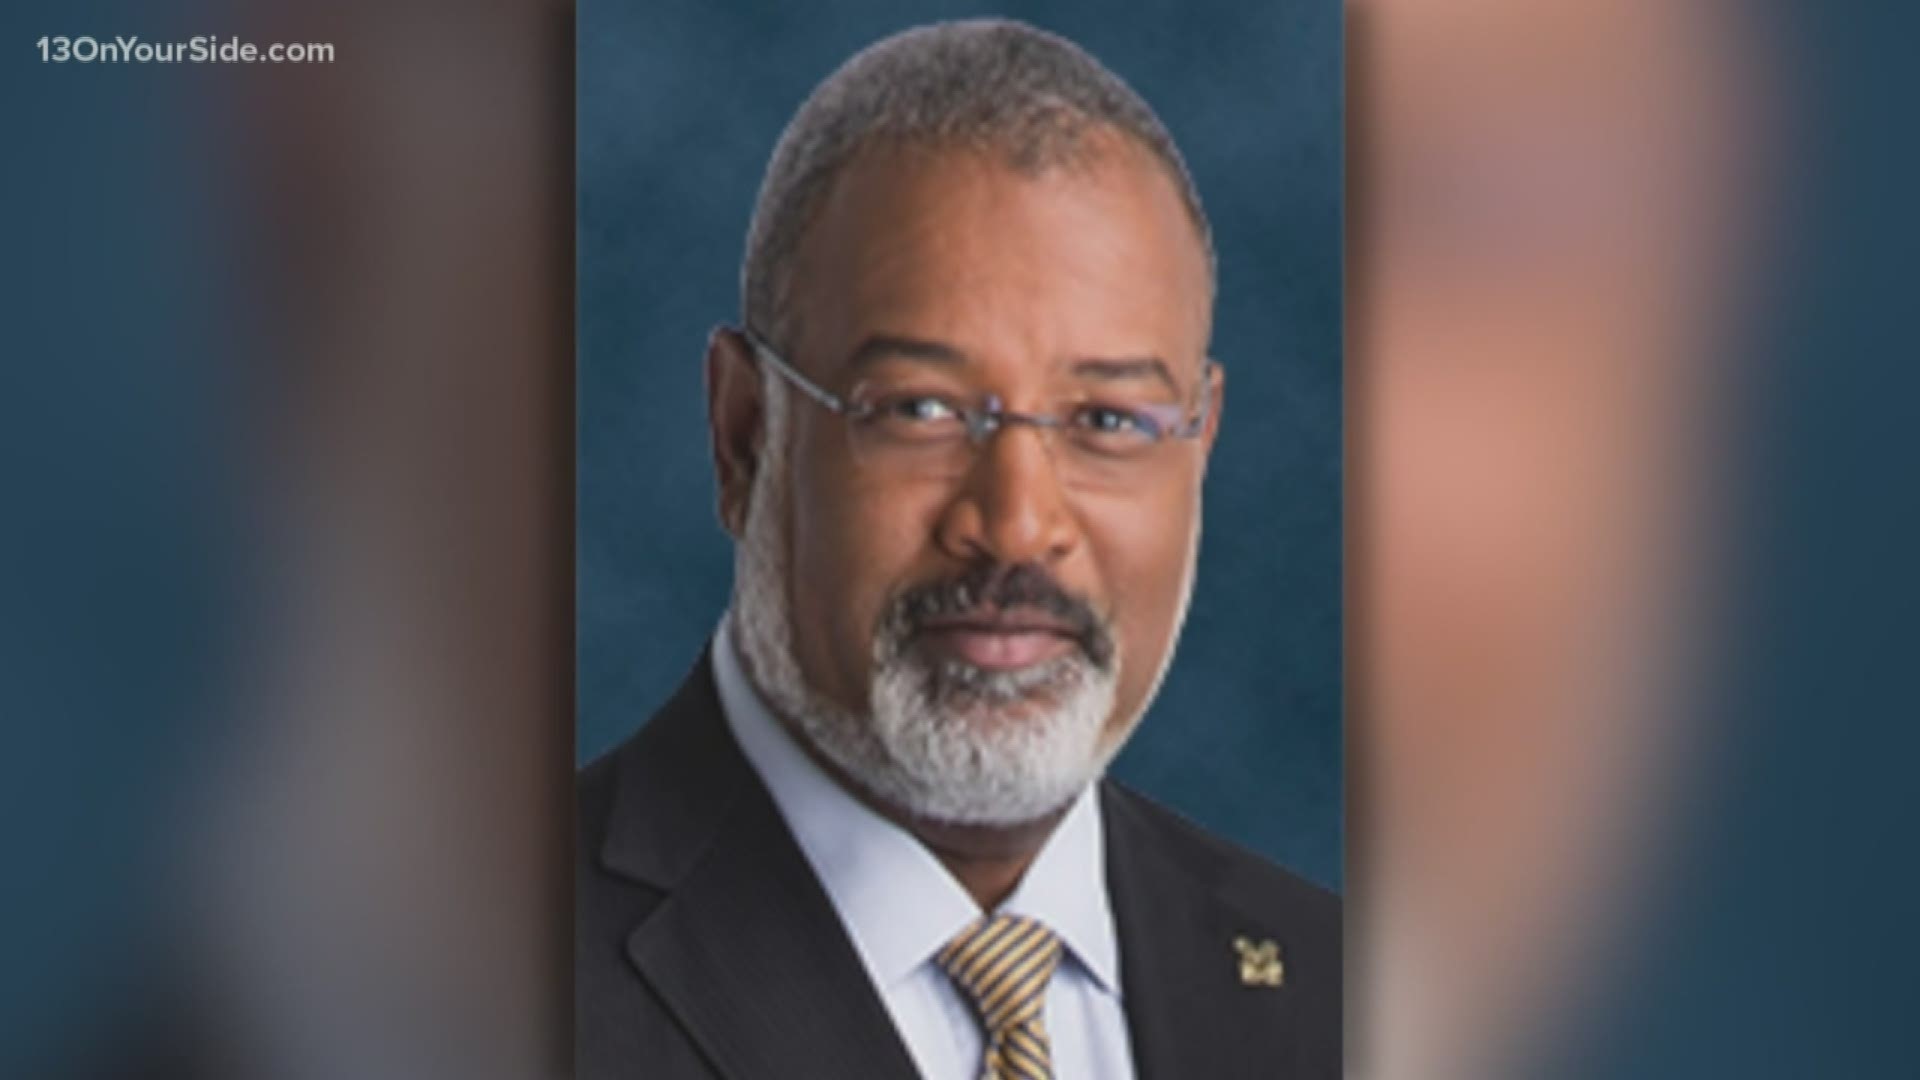 The University of Michigan has placed Provost Martin Philbert on administrative leave while an investigation into allegations of sexual misconduct is underway.